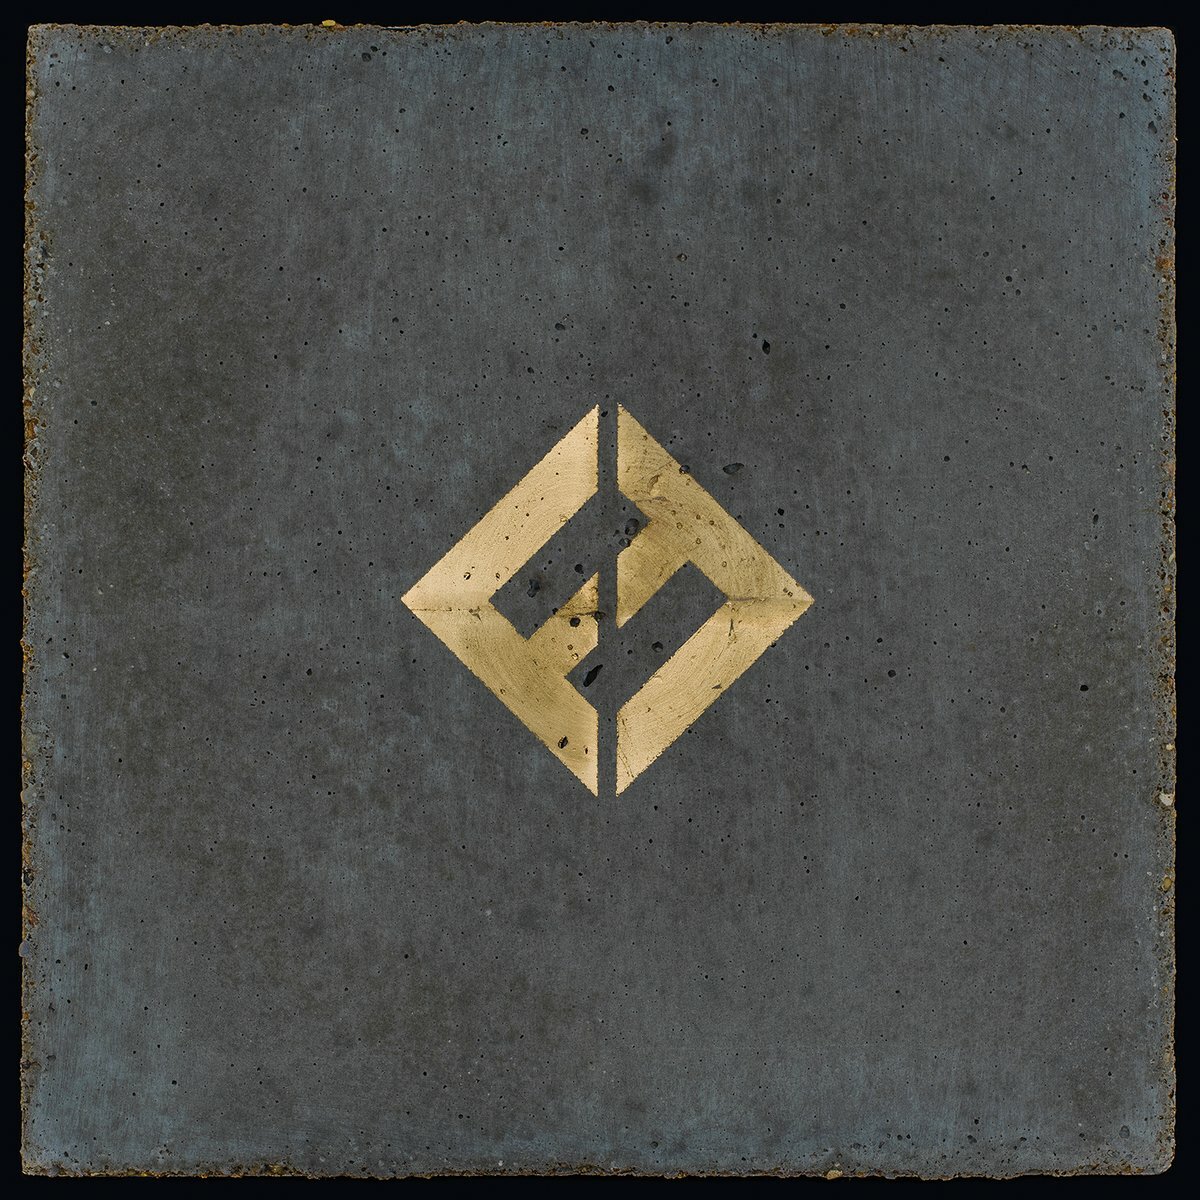 CD - Foo Fighters - Concrete and Gold (Paper Sleeve)